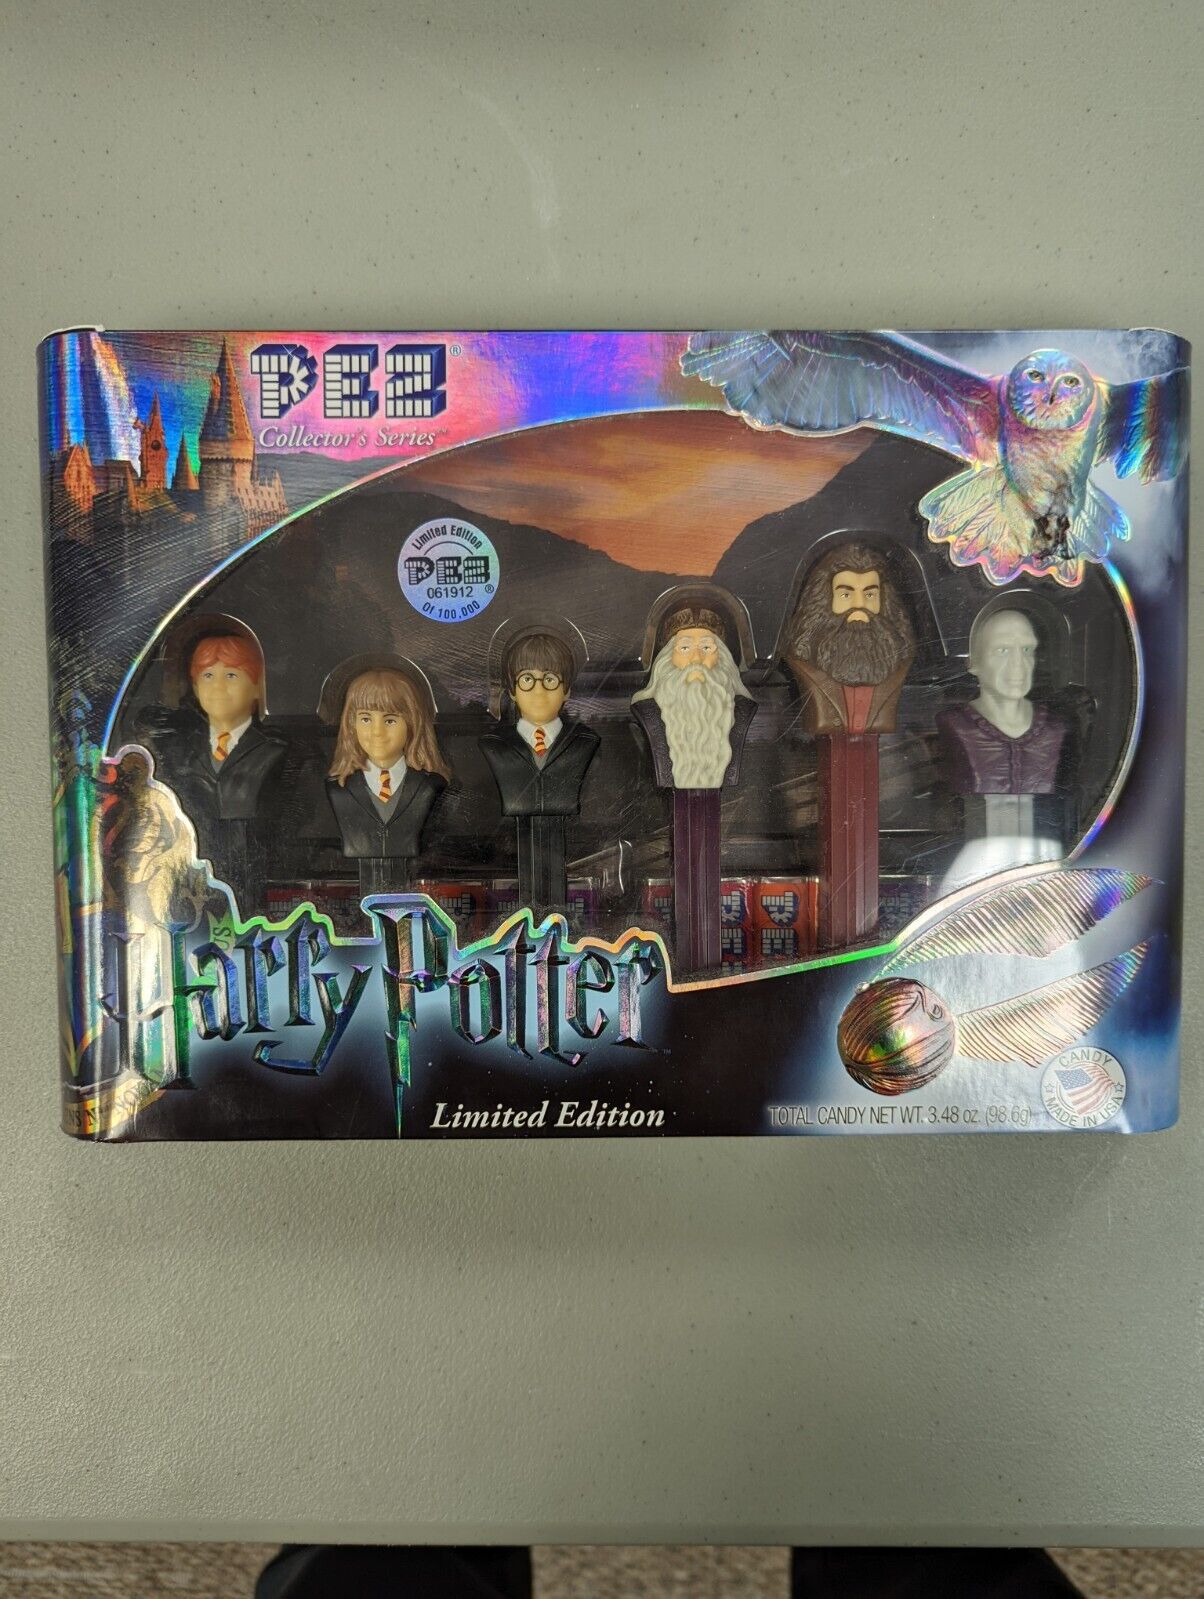 Pez Collector's Series Harry Potter Limited Edition 2015